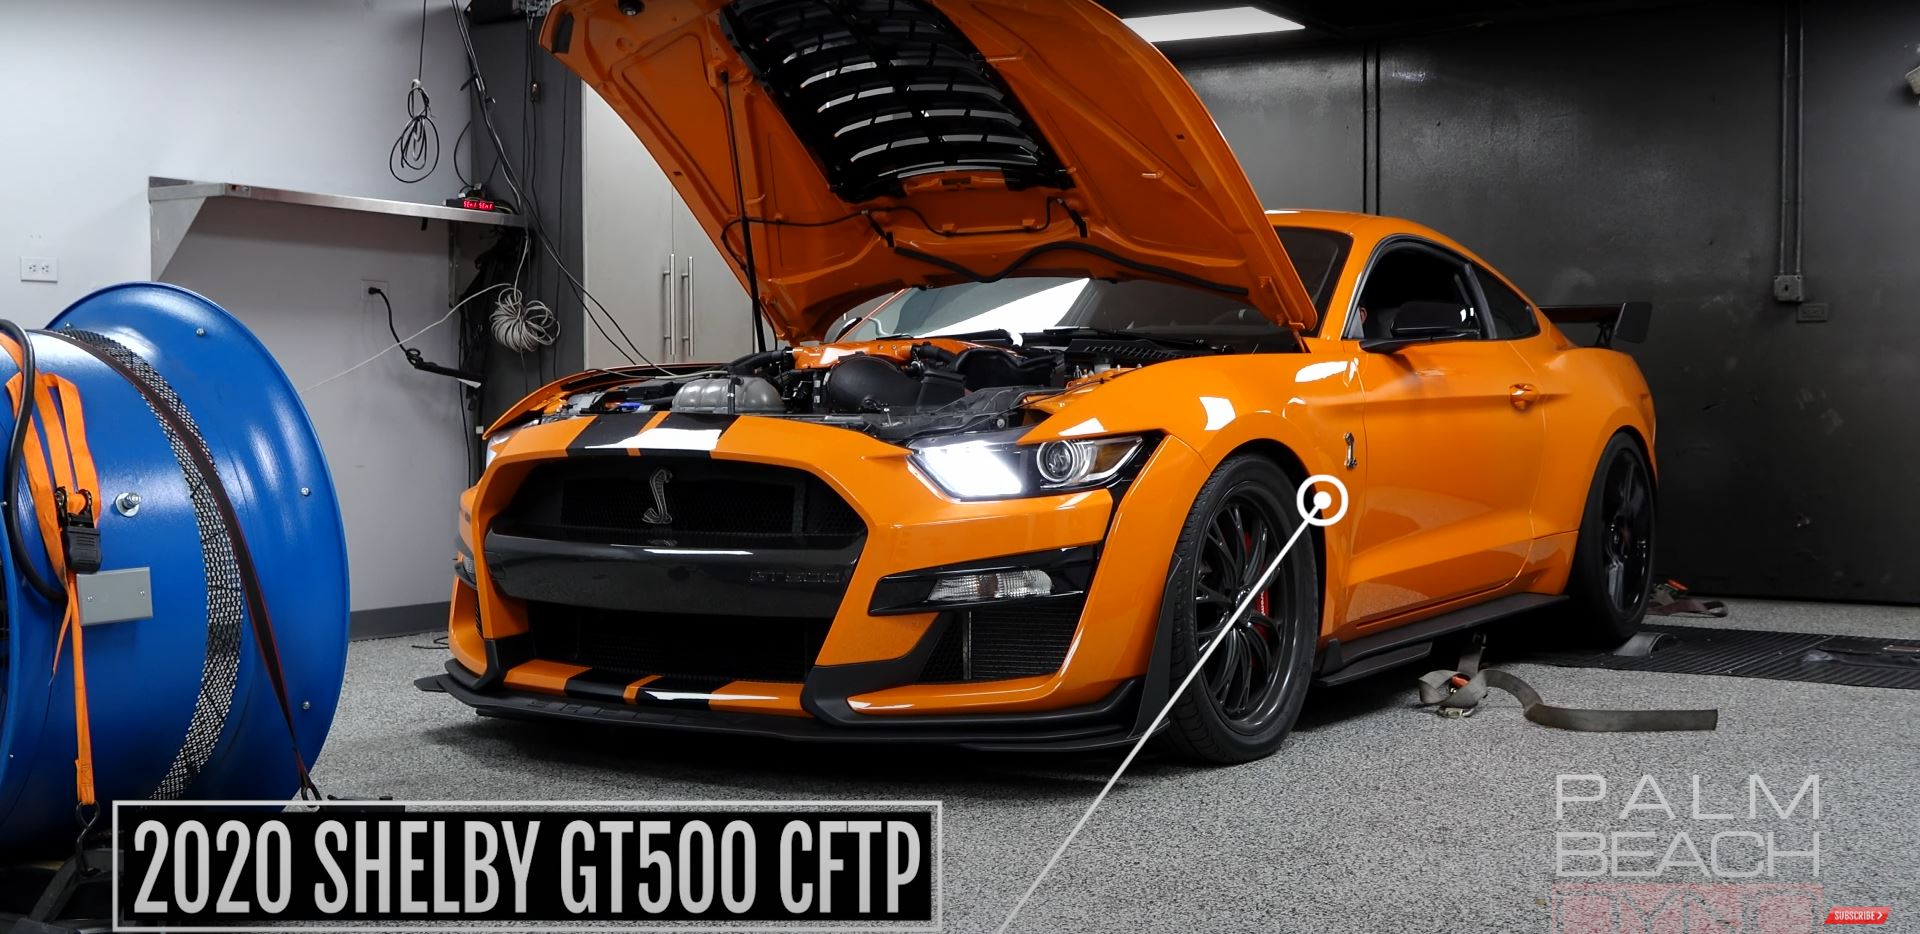 Shelby GT500 Is Reborn With More Power, Looks Bold Enough to Challenge  Supercars - autoevolution